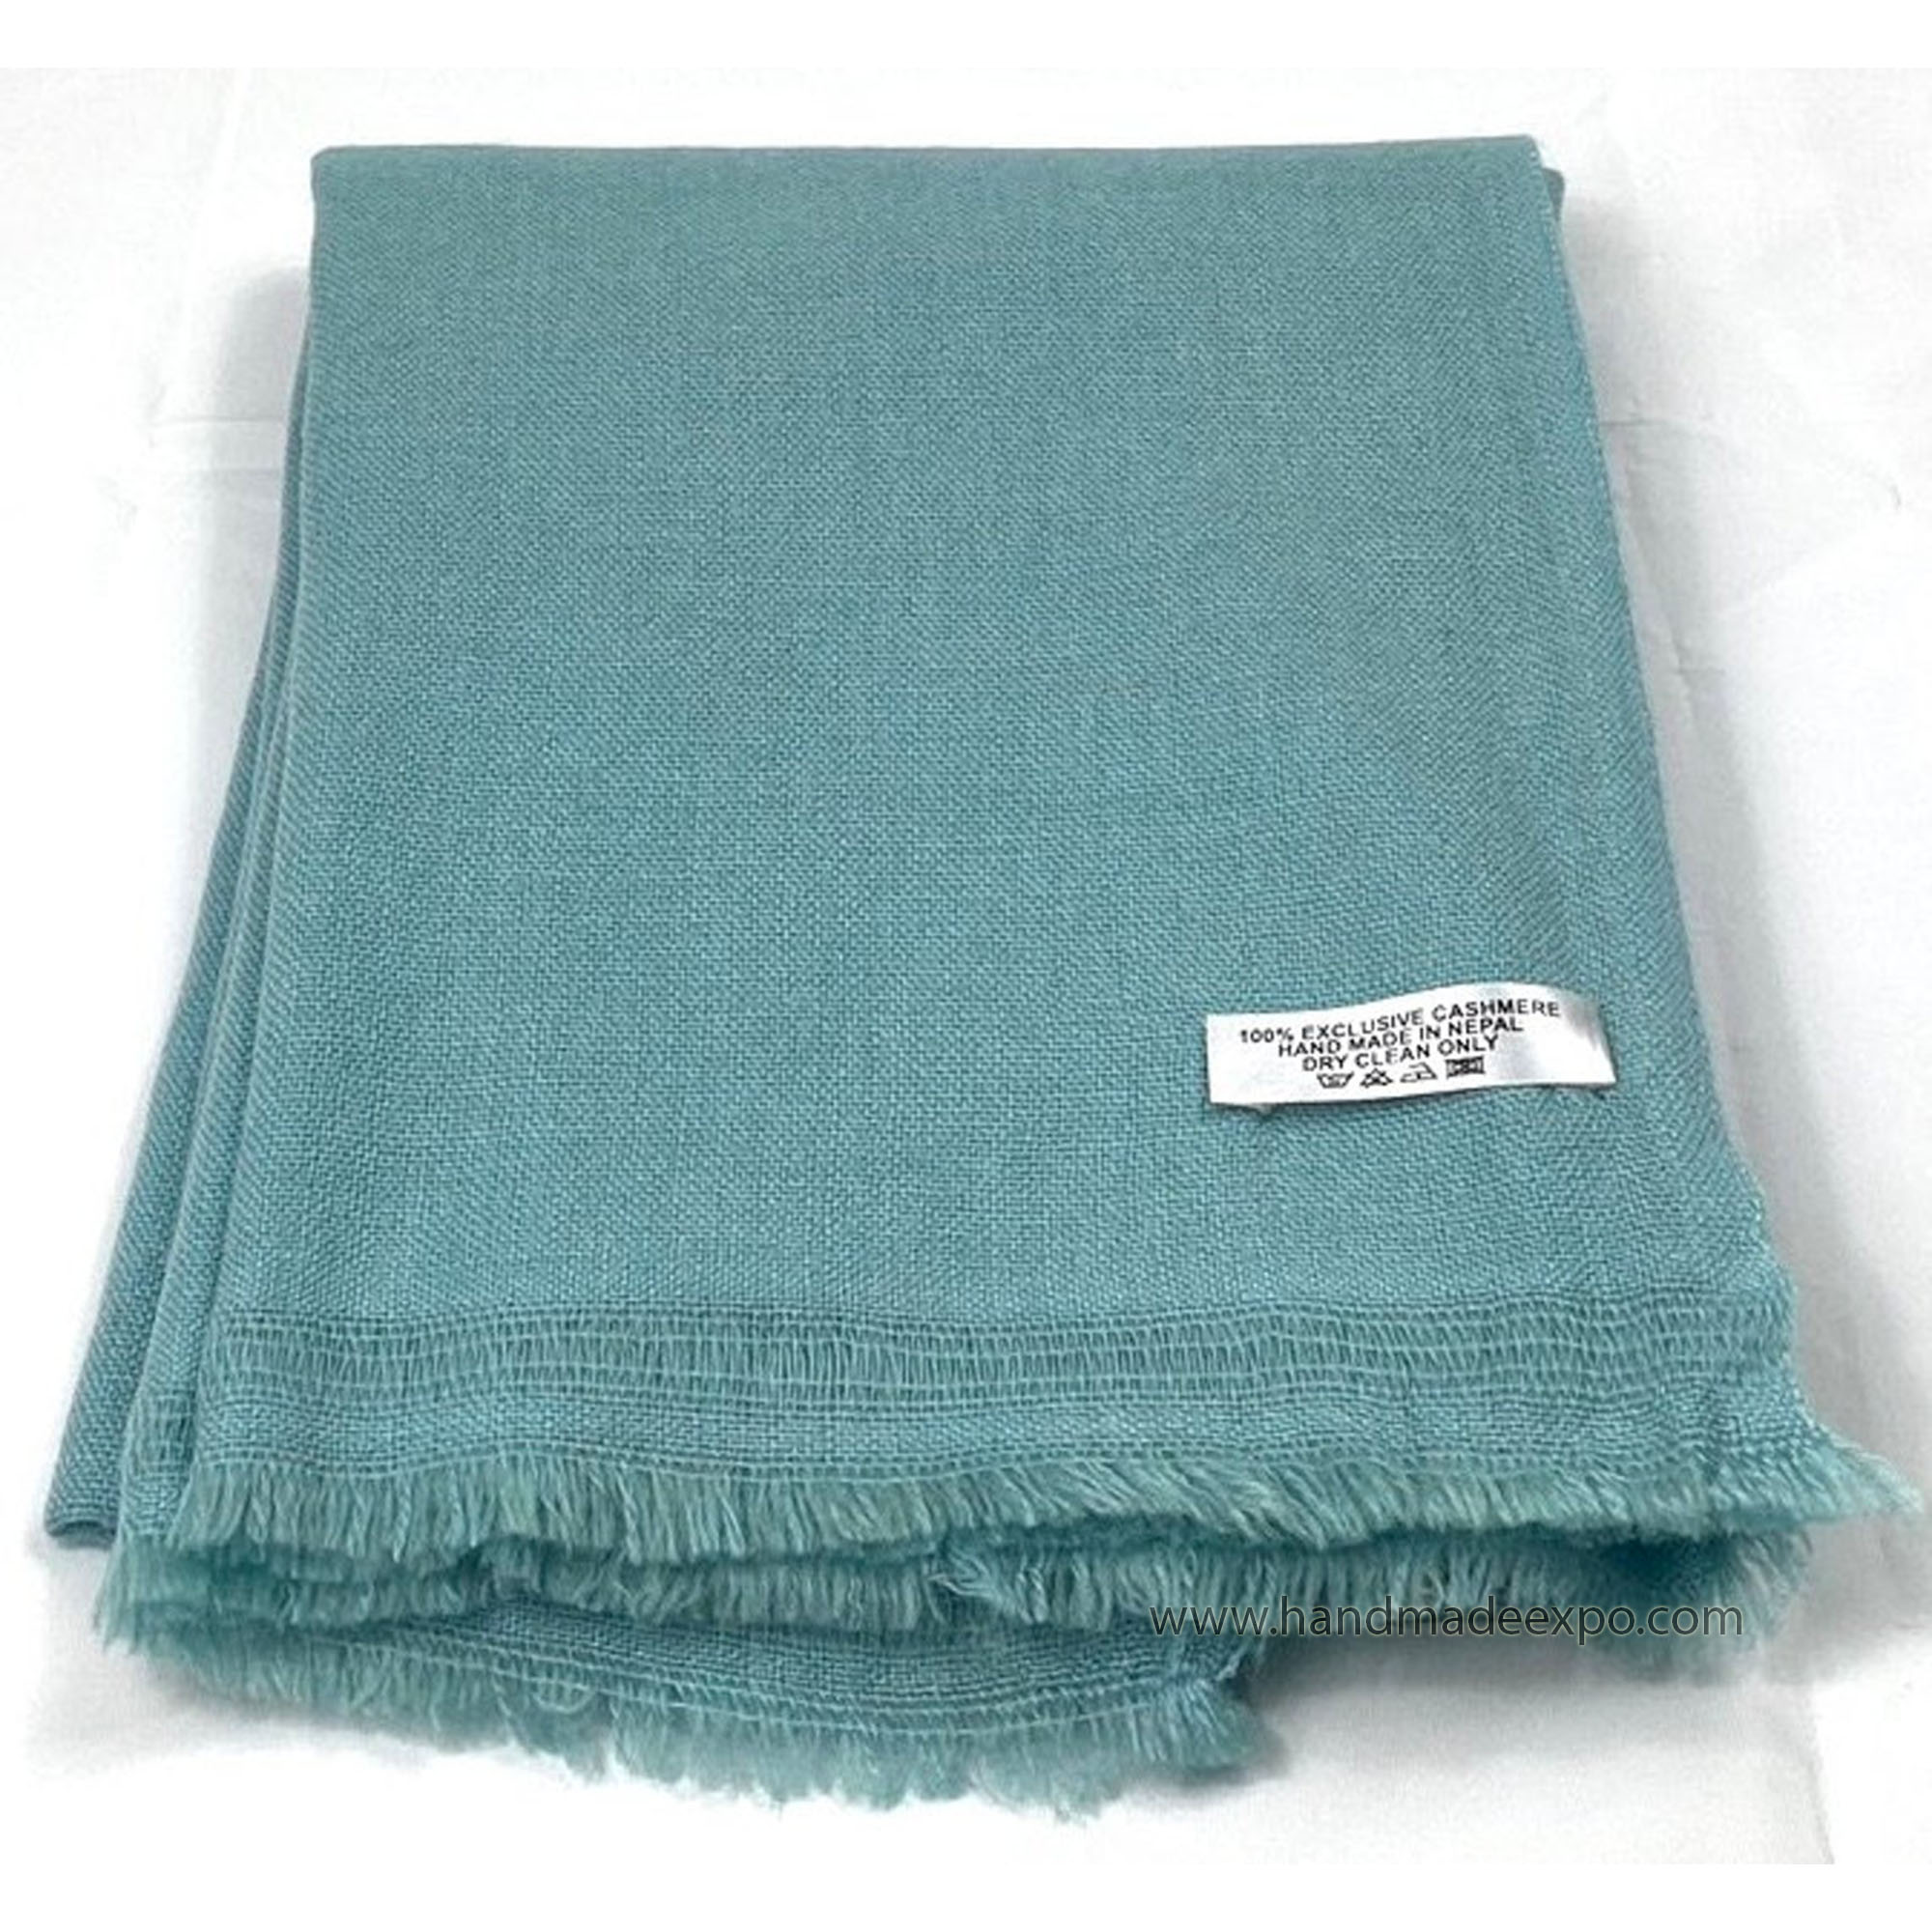 Pashmina Shawl, Nepali Handmade Shawl, In Four Ply Wool, Color Dye tourquise Color